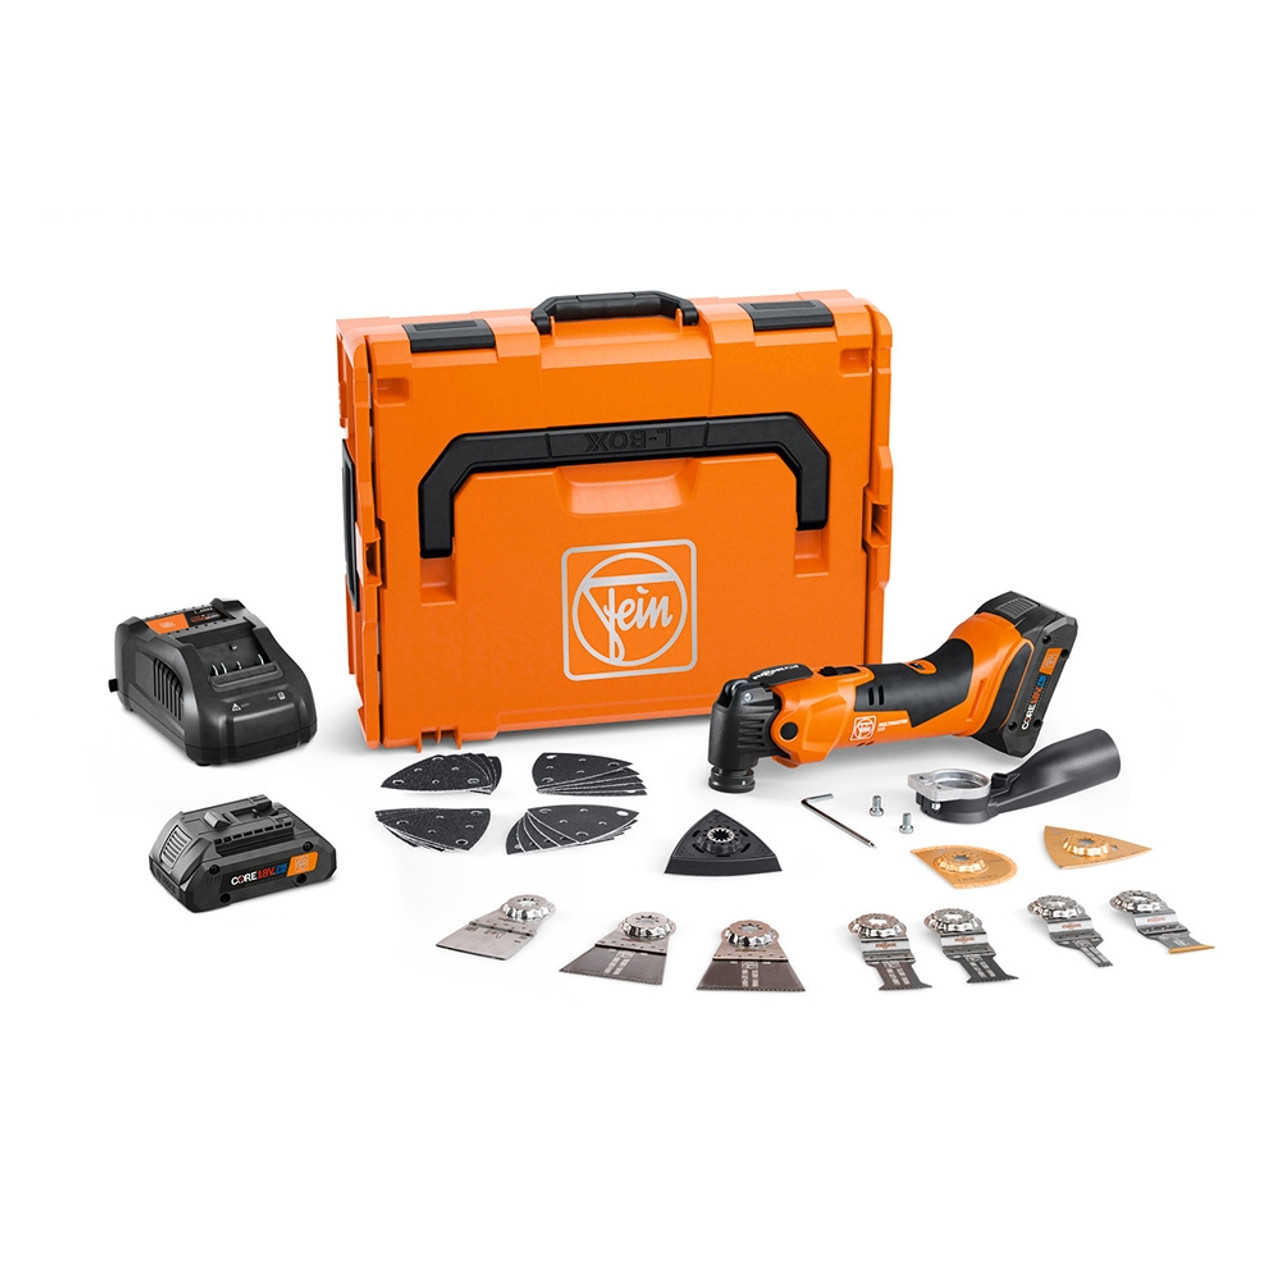 FEIN 71293861090 NEW AmpShare MultiMaster AMM500 Kit AS, Cordless Oscillating Multi-Tool with 2x 4 Ah Procore Batteries, Charger, and Full Accessory Kit in L-Box